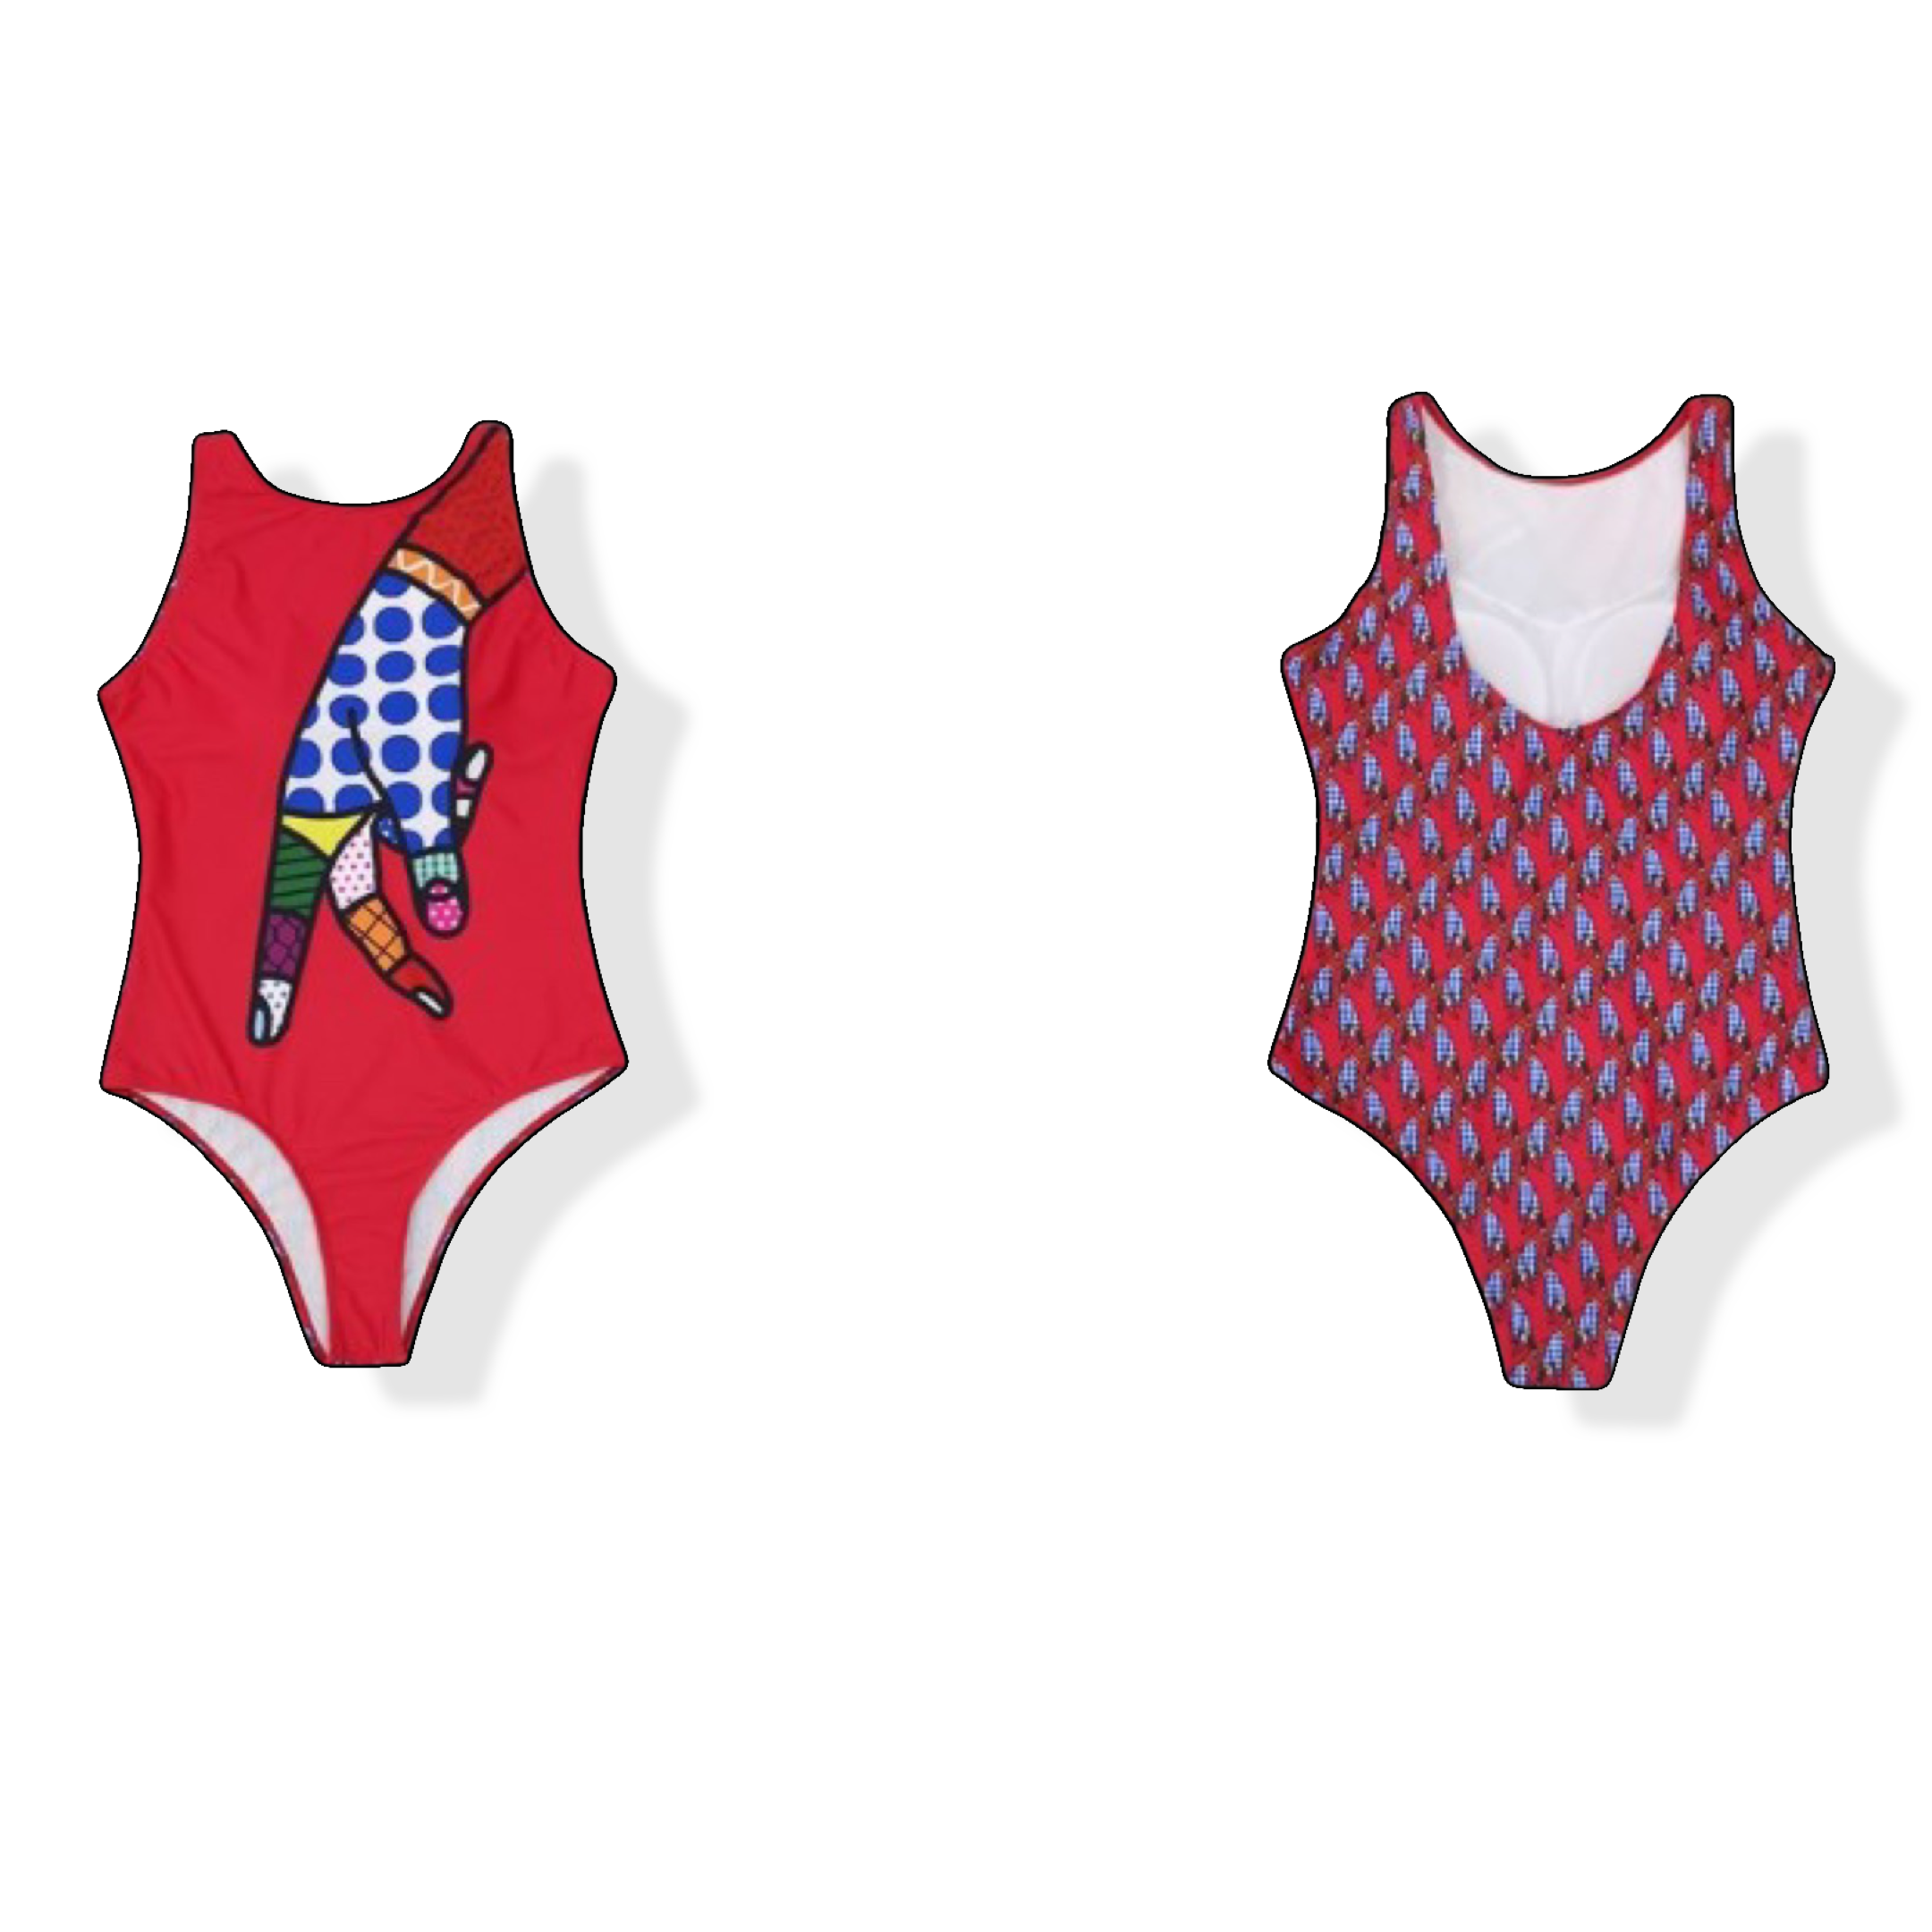 Red Picasso swimsuit